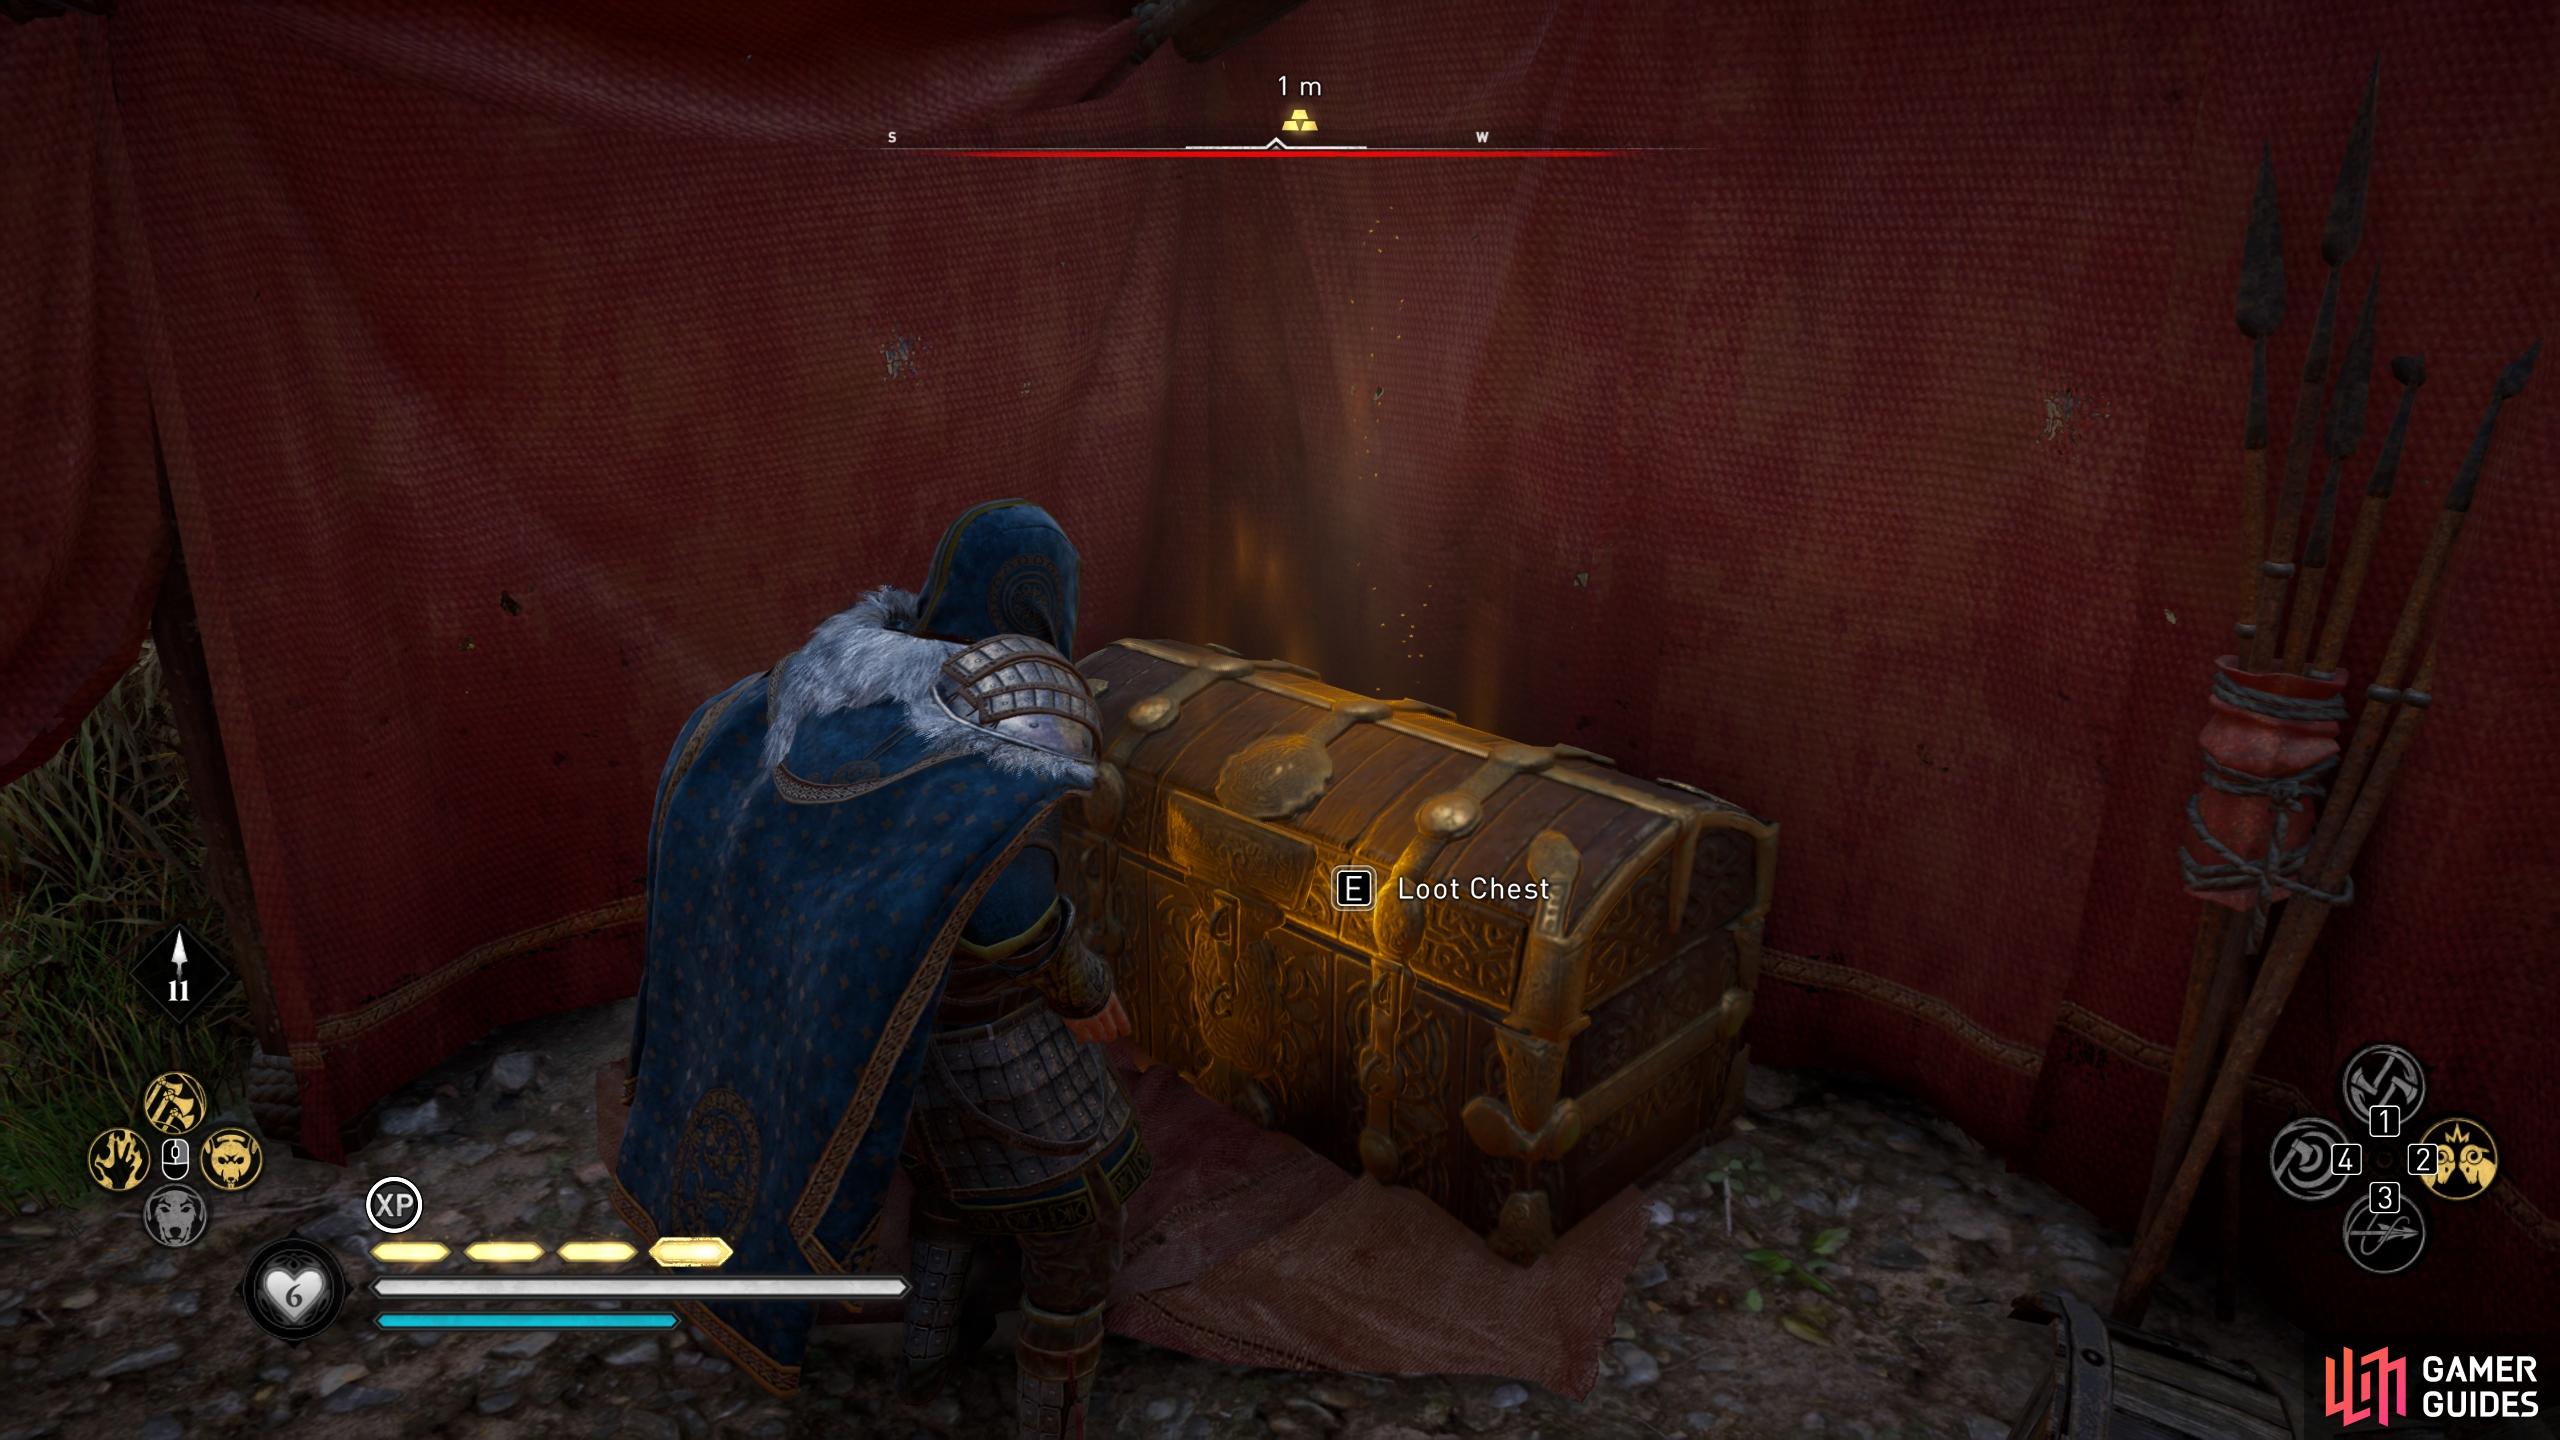 Loot the chest in the tent for the ingot.